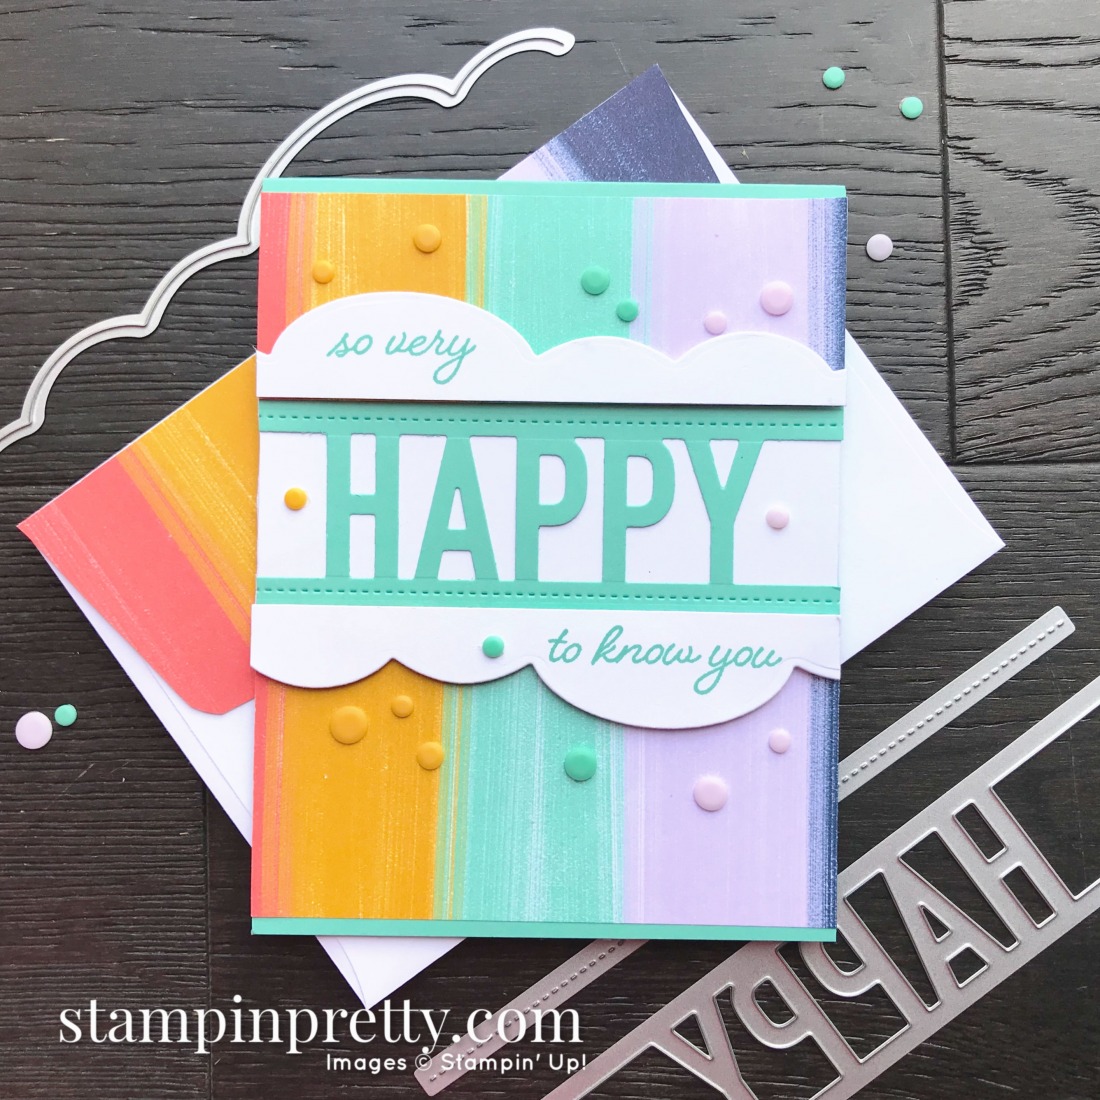 Create this card using the So Much Happy Bundle from Stampin' Up! Card exclusive to customers of Mary Fish, Stampin' Pretty